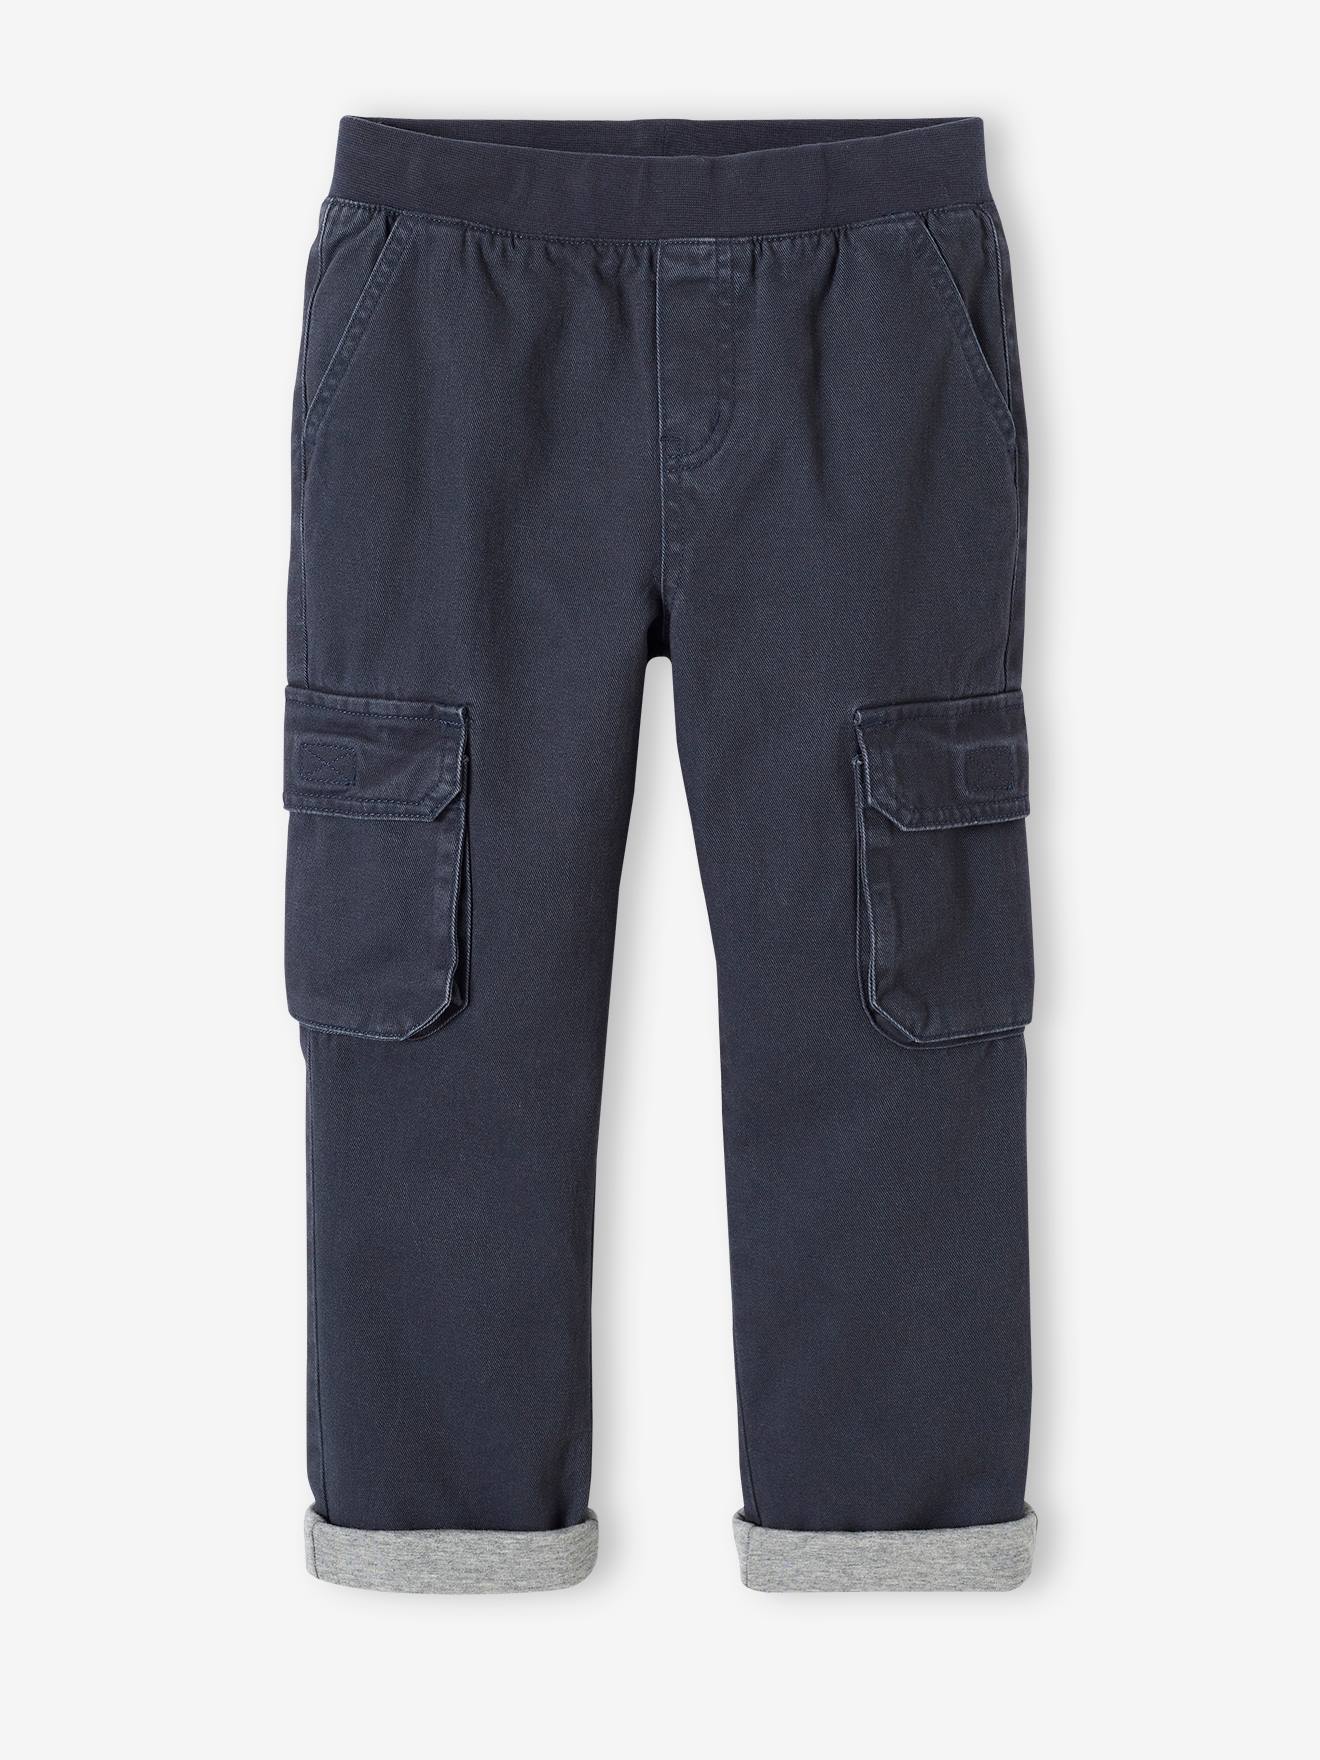 Boys Uniform Canvas Woven Pull On Cargo Pants | The Children's Place - NEW  NAVY